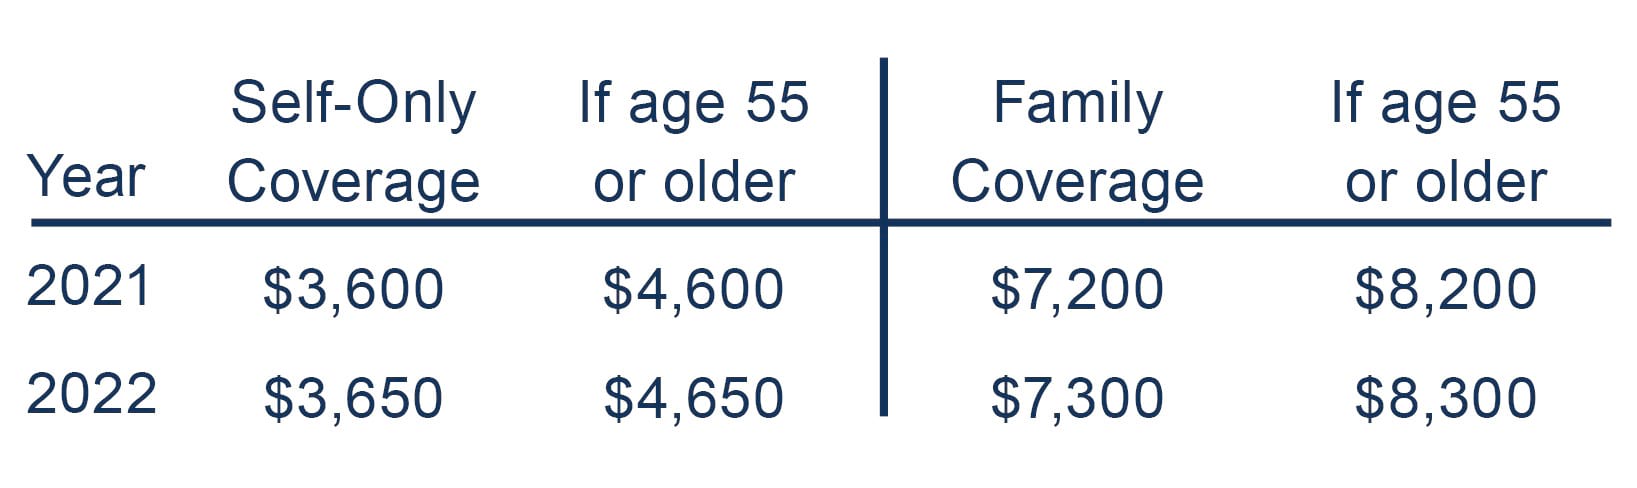 HSA Contribution limits. $3,600 self only coverage. $4,600 for 55 and older. $7,200 family coverage. $8,200 55 and older family coverage